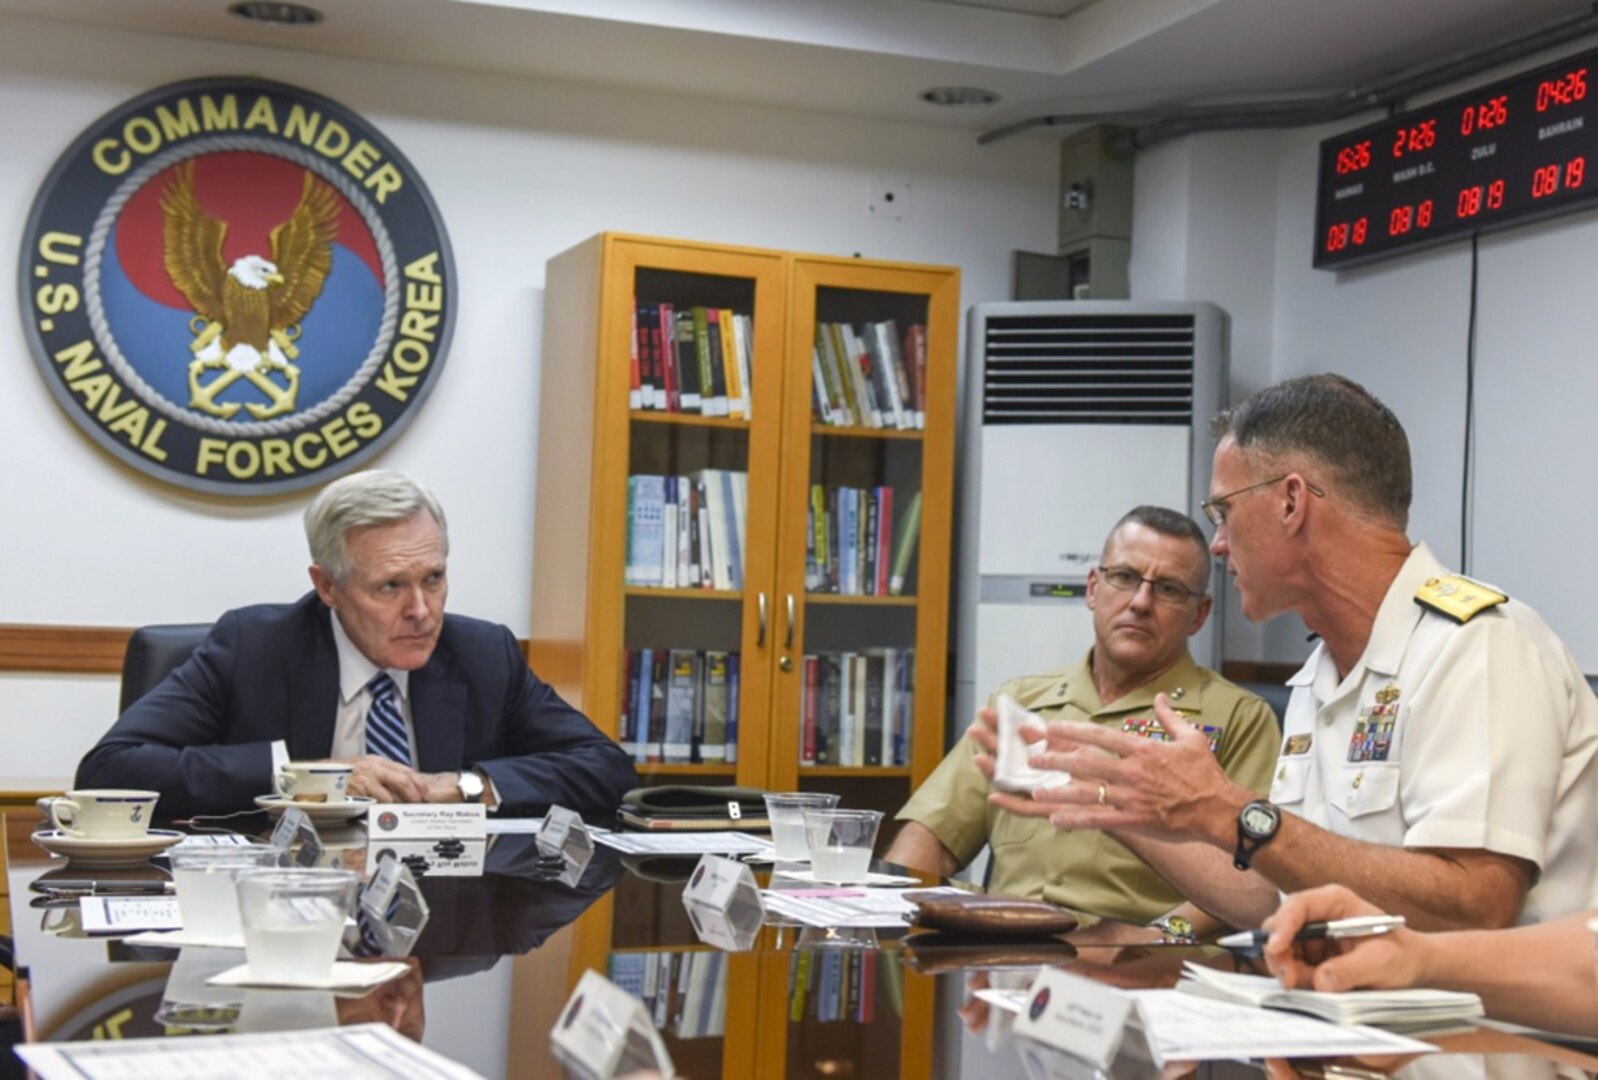 Secretary of the Navy (SECNAV) Ray Mabus meets with U.S. Marine Maj. Gen. Robert Hedelund, the commander of Marine Forces Korea (MARFORK), and Rear Adm. Bill Byrne, the commander of U.S. Naval Forces Korea (CNFK), Aug. 19, 2016. Mabus is in Korea as part of a routine visit designed to strengthen relationships between the U.S. and ROK navies and Marine Corps. 